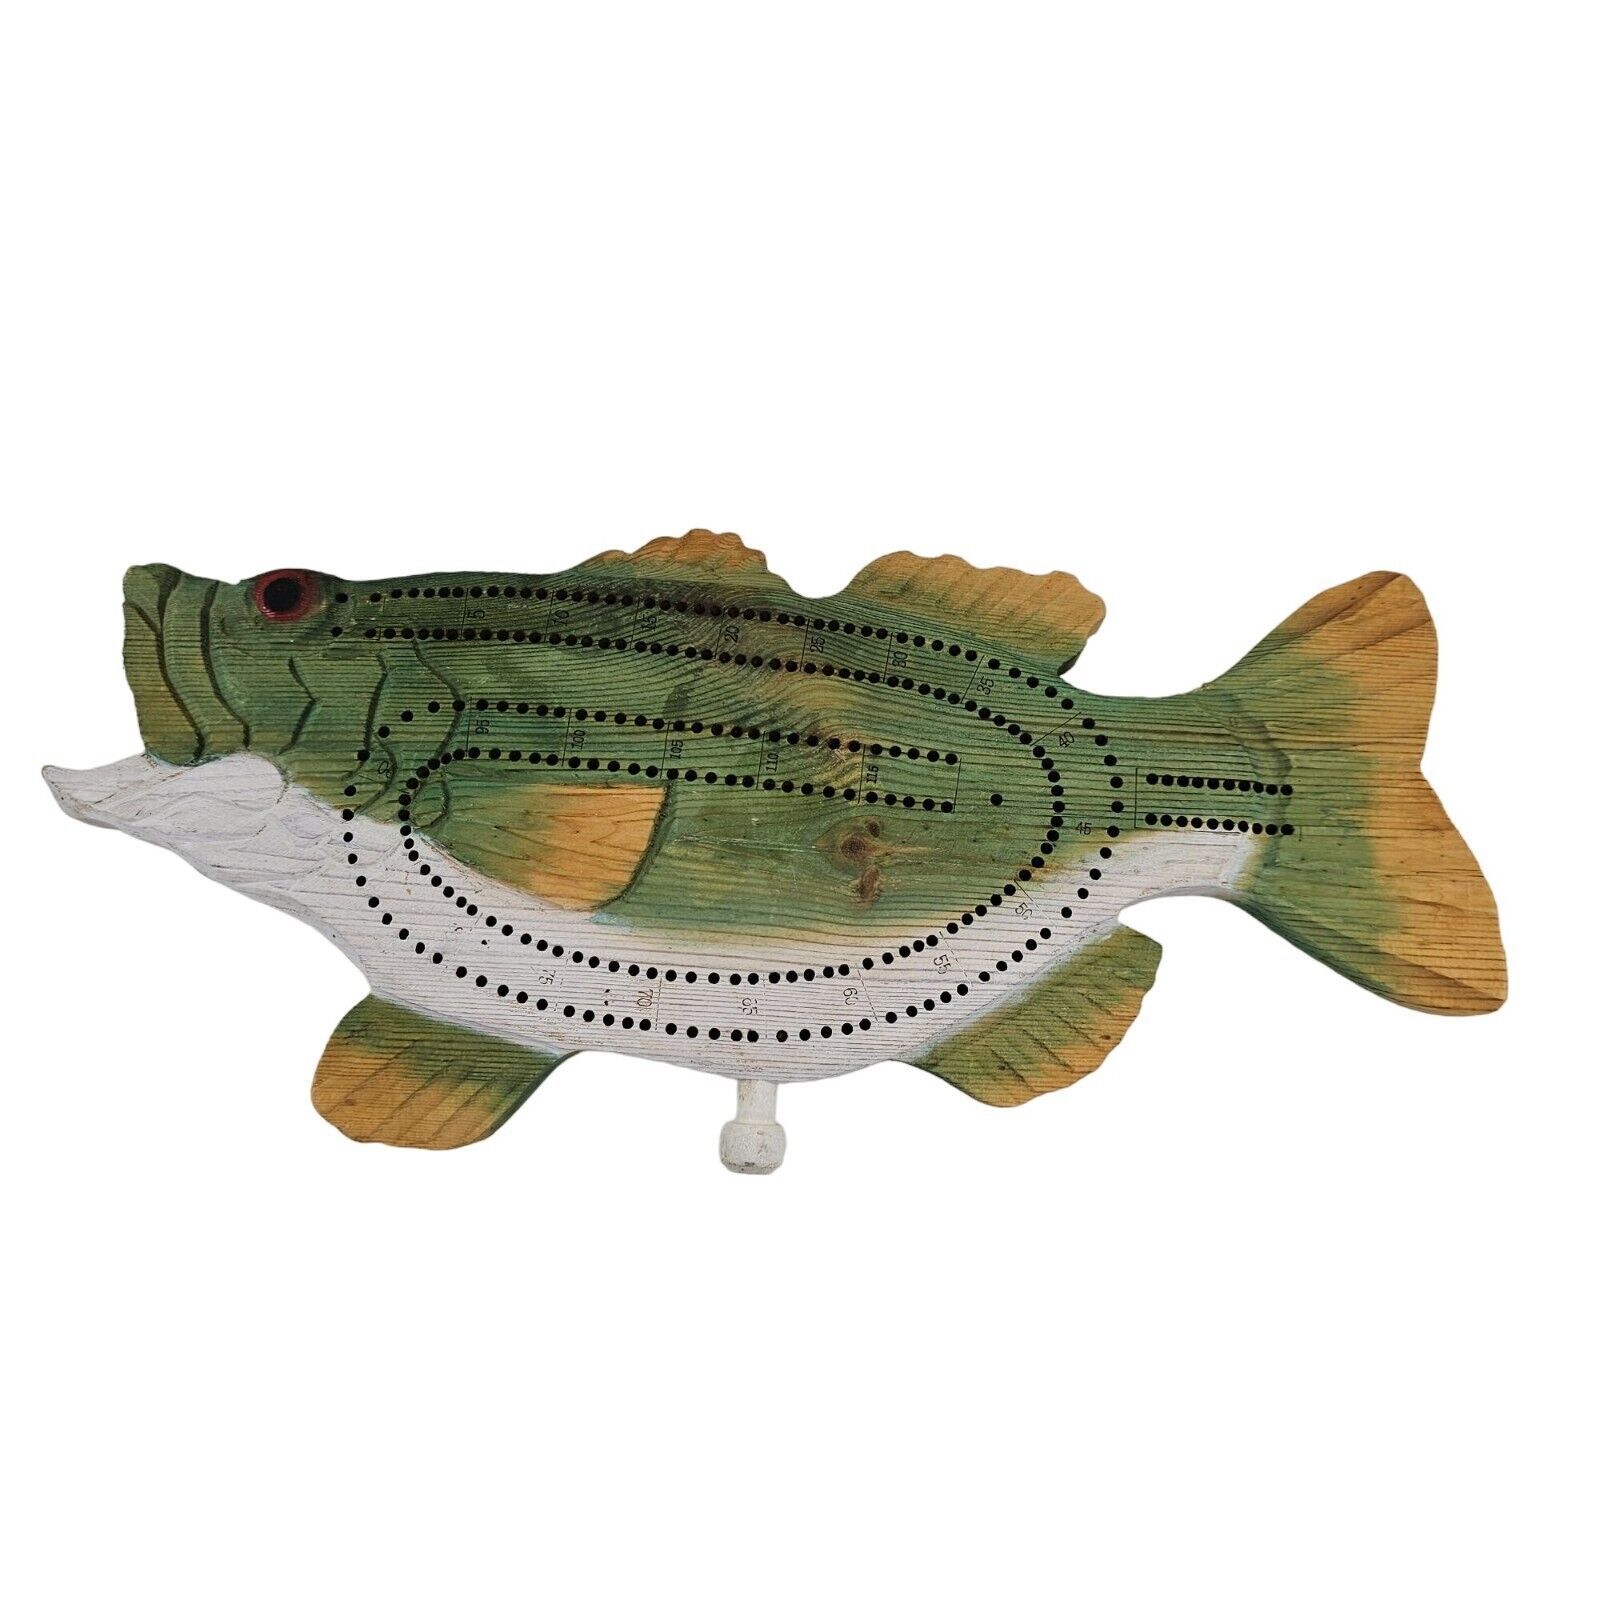 Big Mouth Bass Cribbage Board Fish Wooden Rustic - $34.99